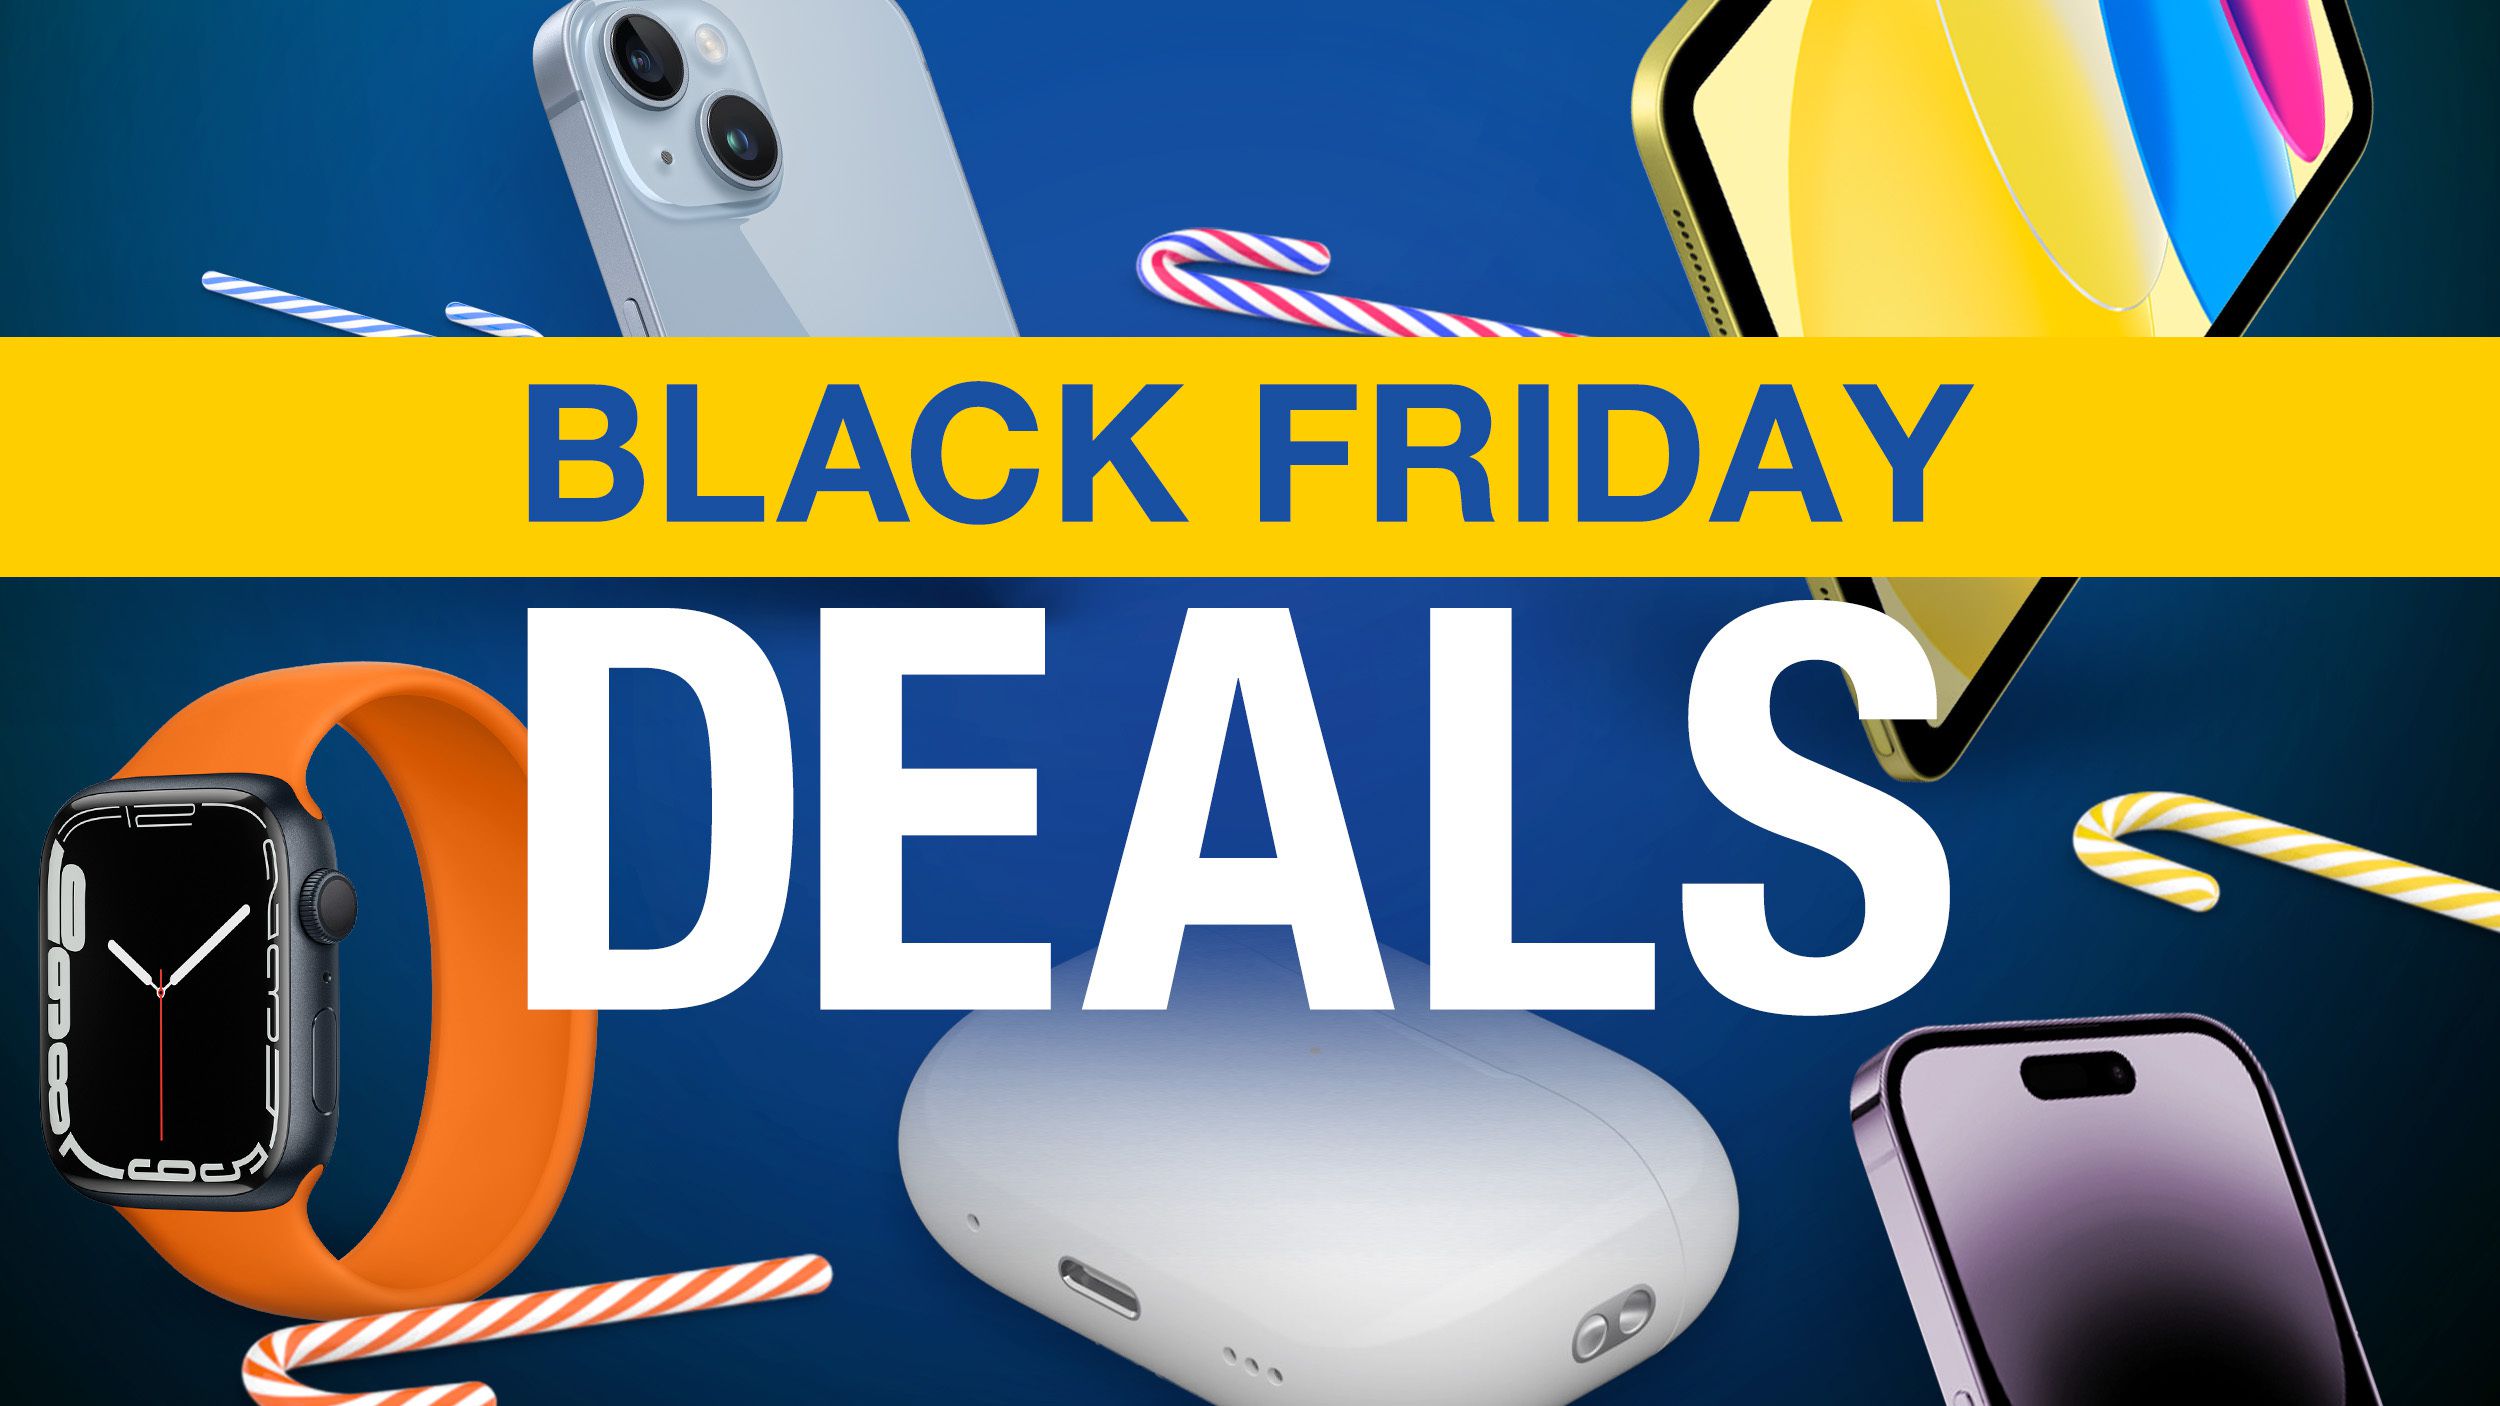 Apple Black Friday Deals Available Already: AirPods, iPhone, iPad, and More